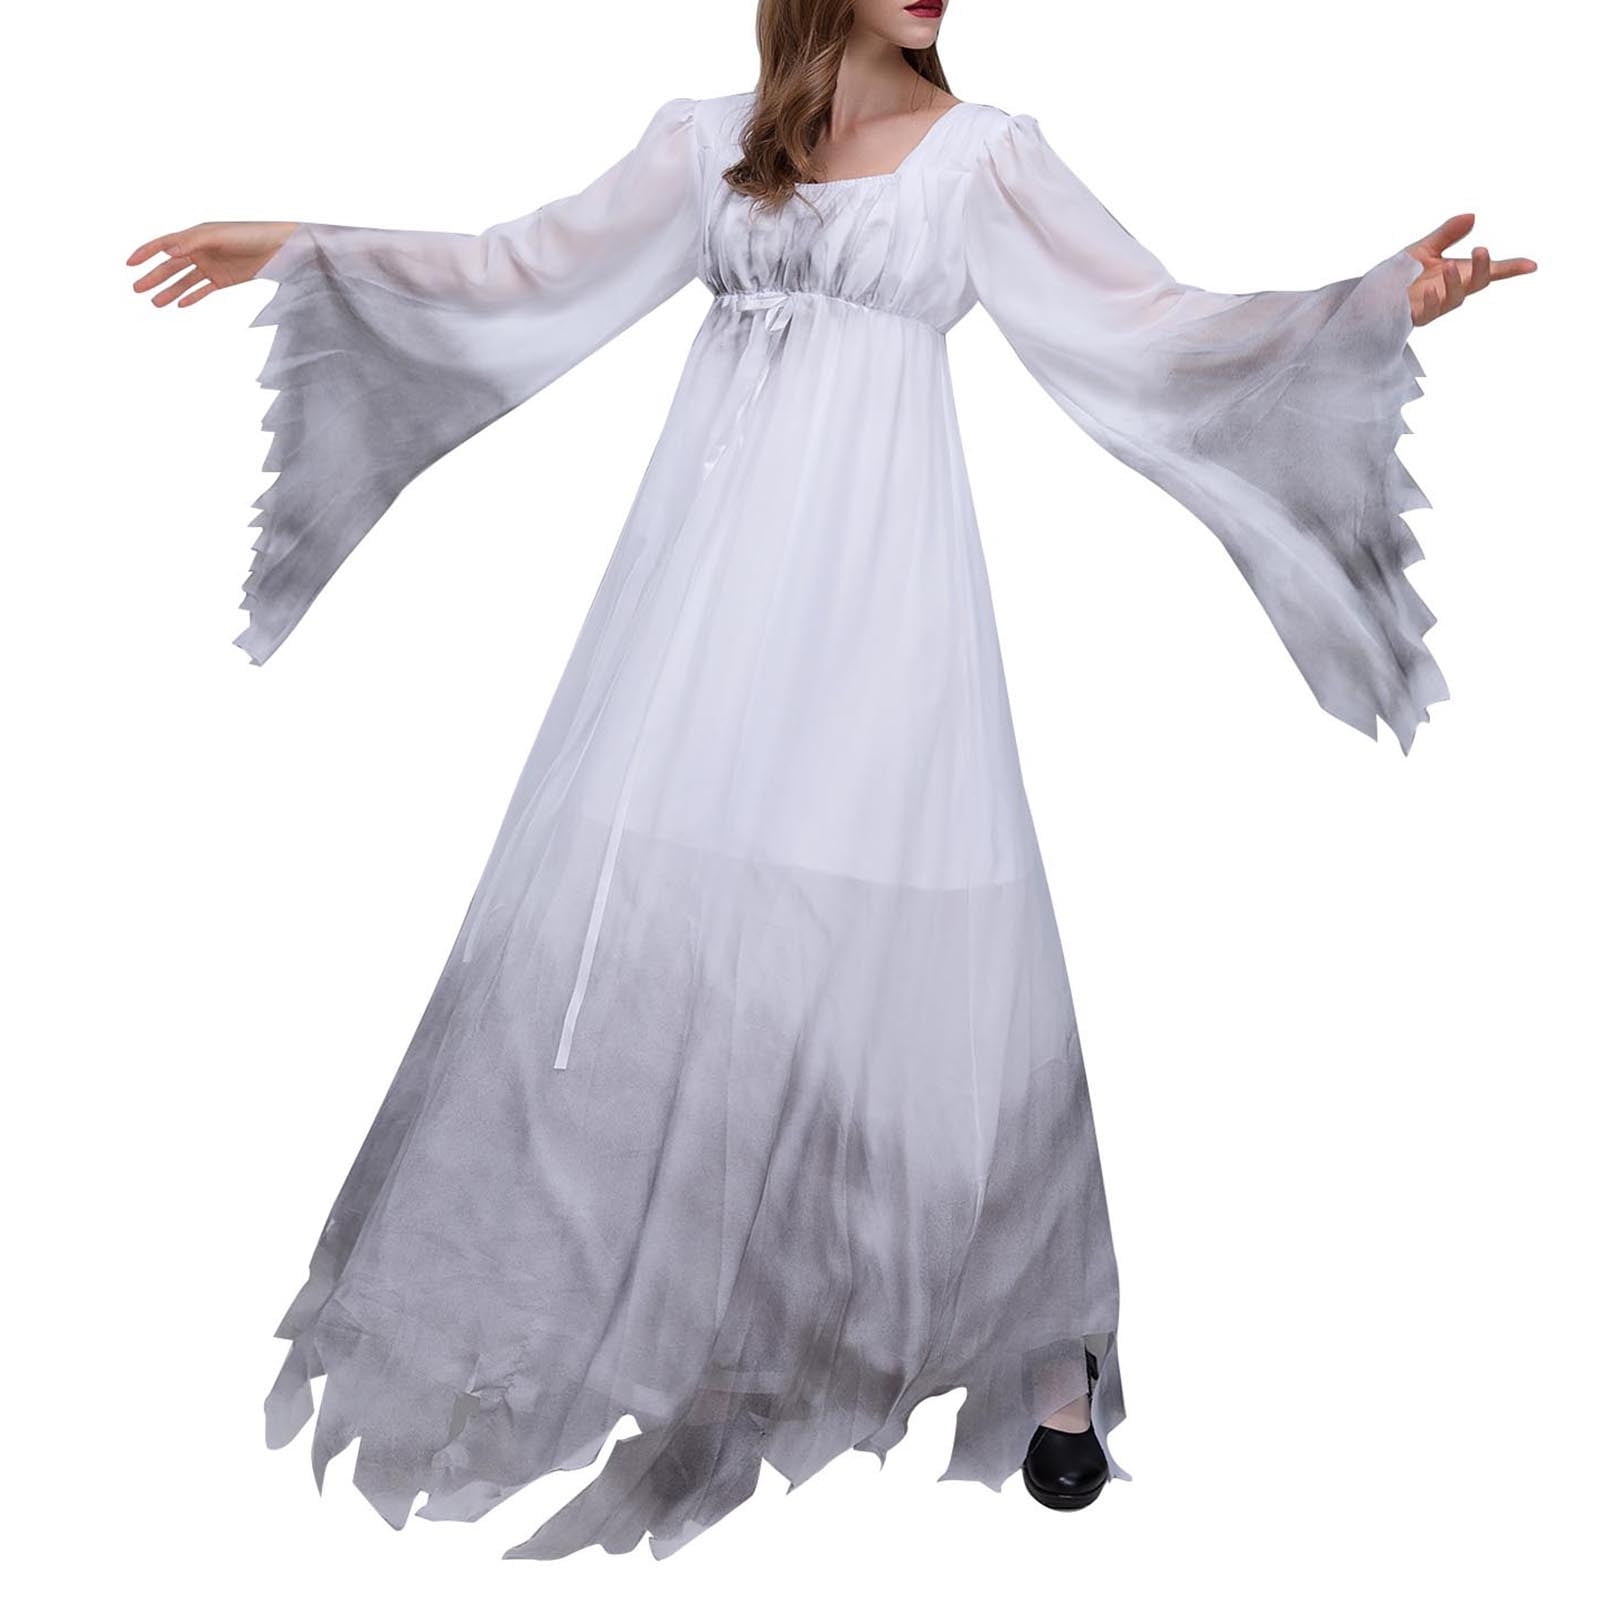  Mepase 2 Pcs Halloween Ghost Costume Women with White Veil  Gossamer Ghost Bride Dress Vintage Zombie Bride Costume Gothic Victorian  White Fancy Dress for Women Girls Halloween Cosplay Party : Clothing